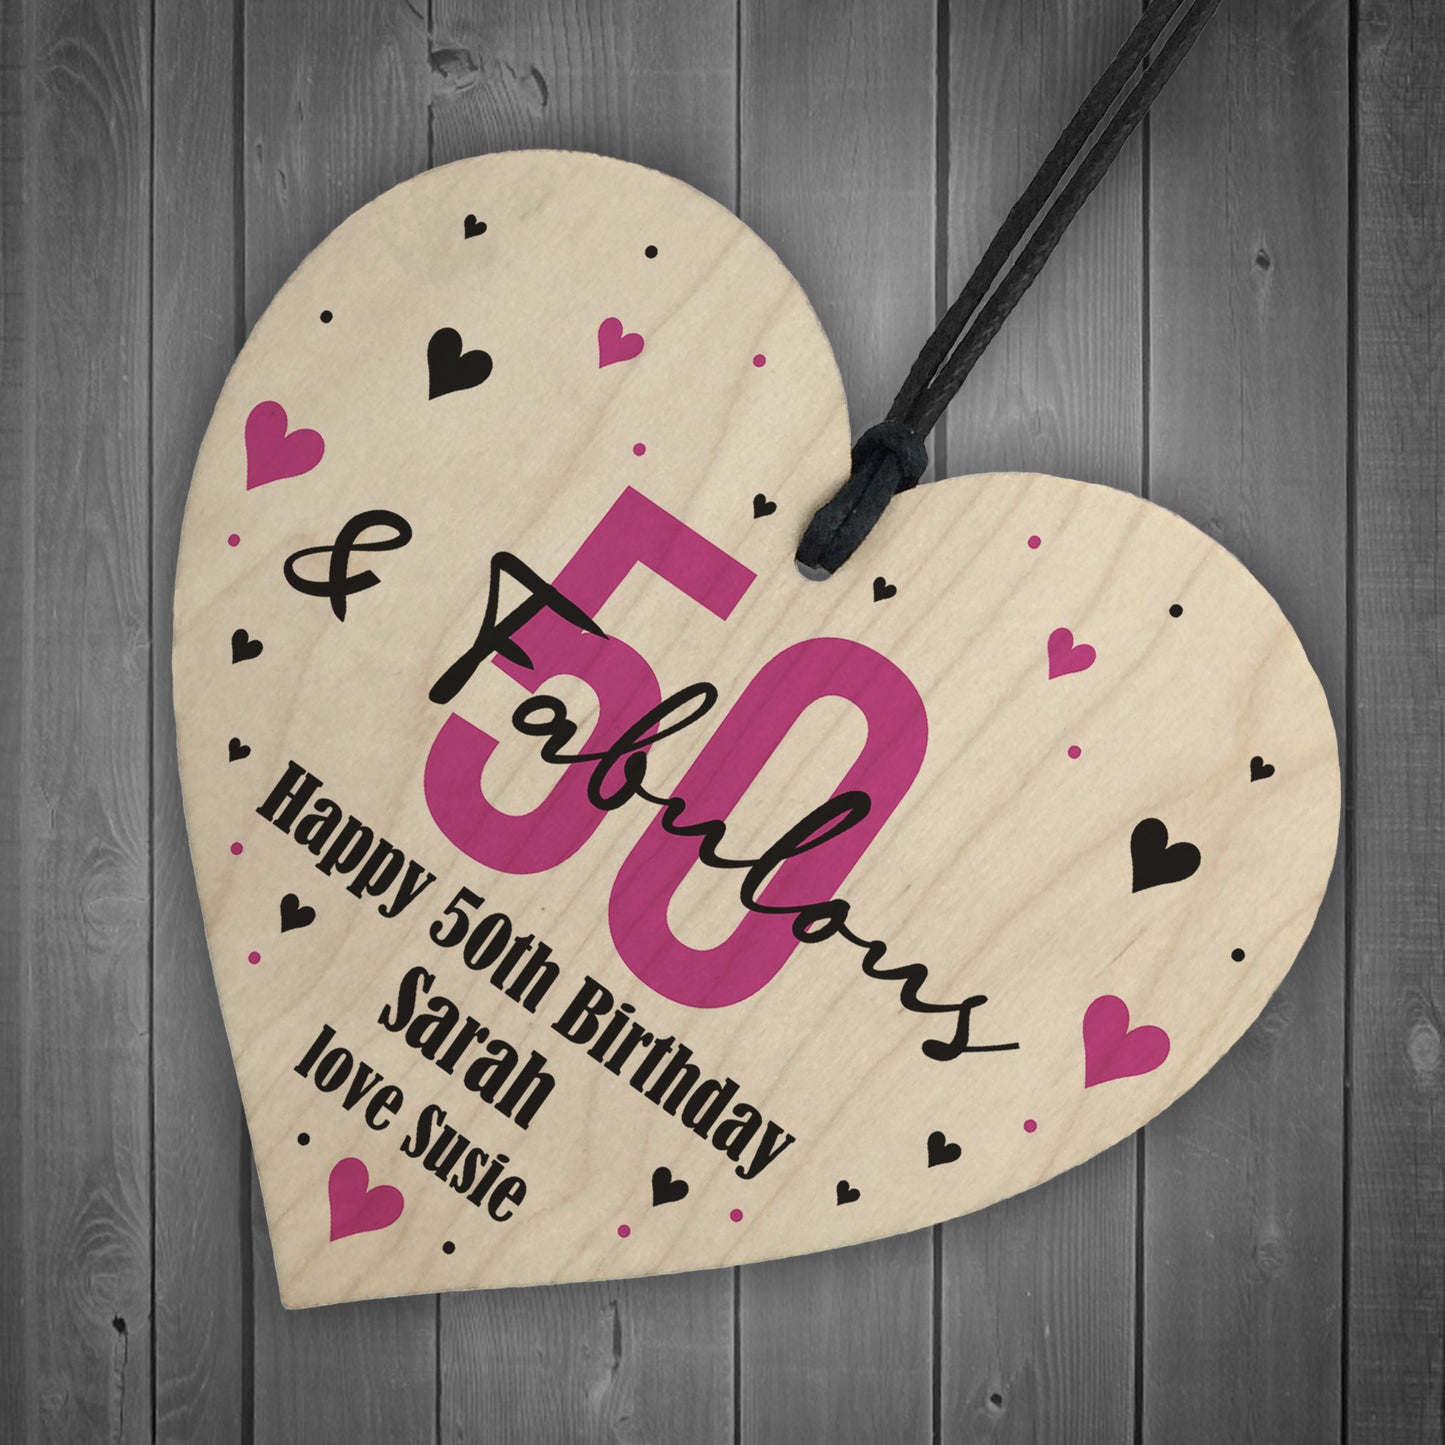 50 And Fabulous Gift Wood Heart Personalised 50th Birthday Gift